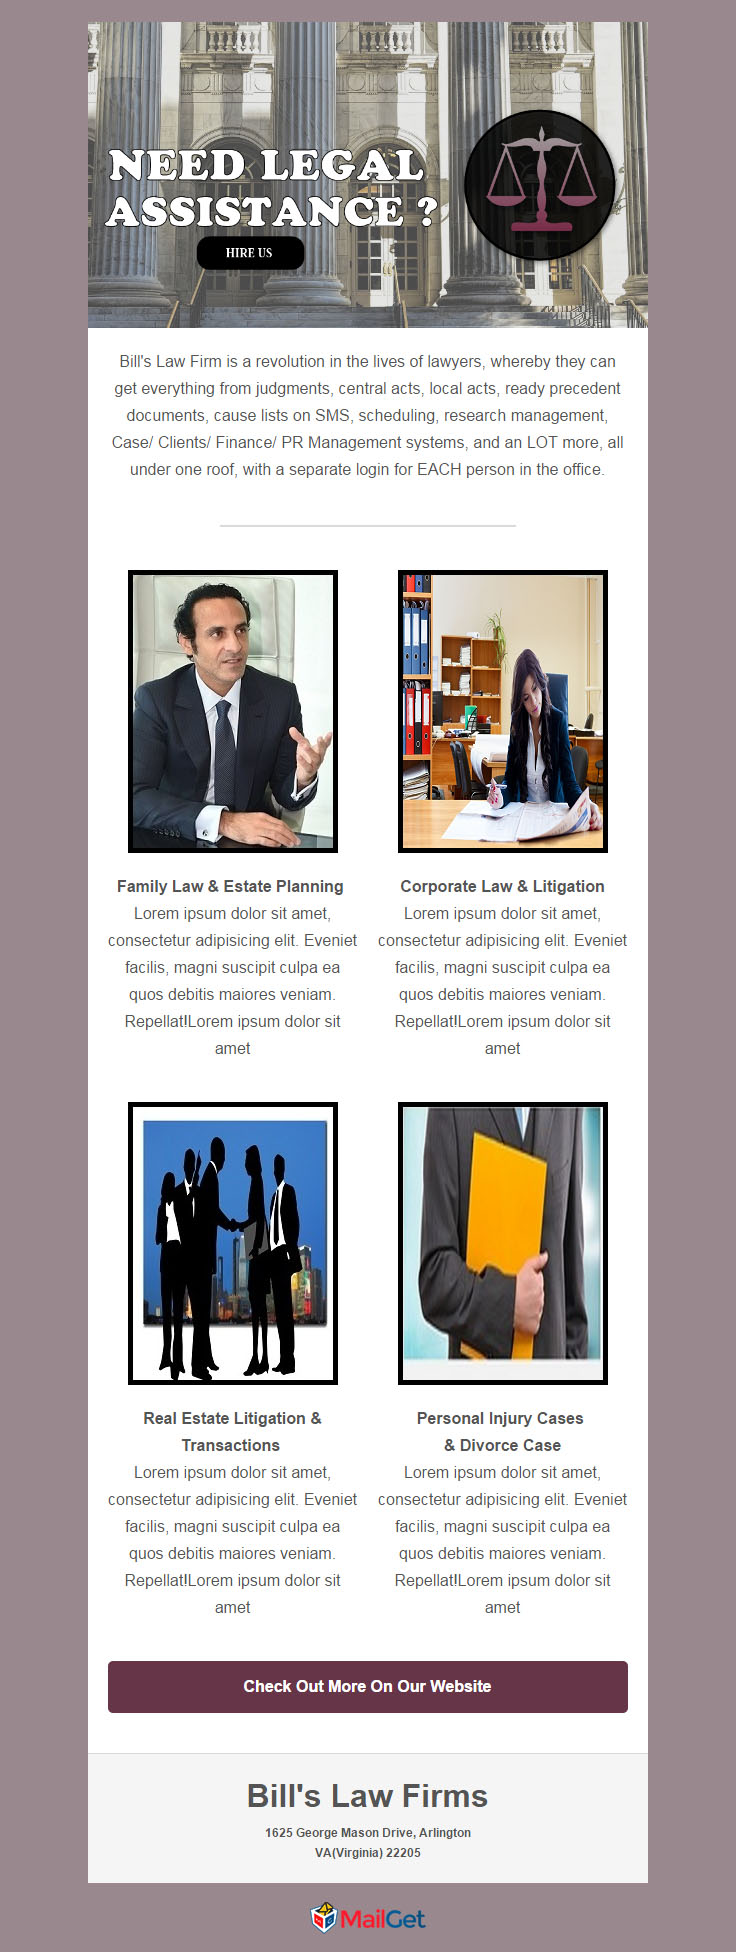 Email Templates For Lawyers & Law Firms4 MailGet